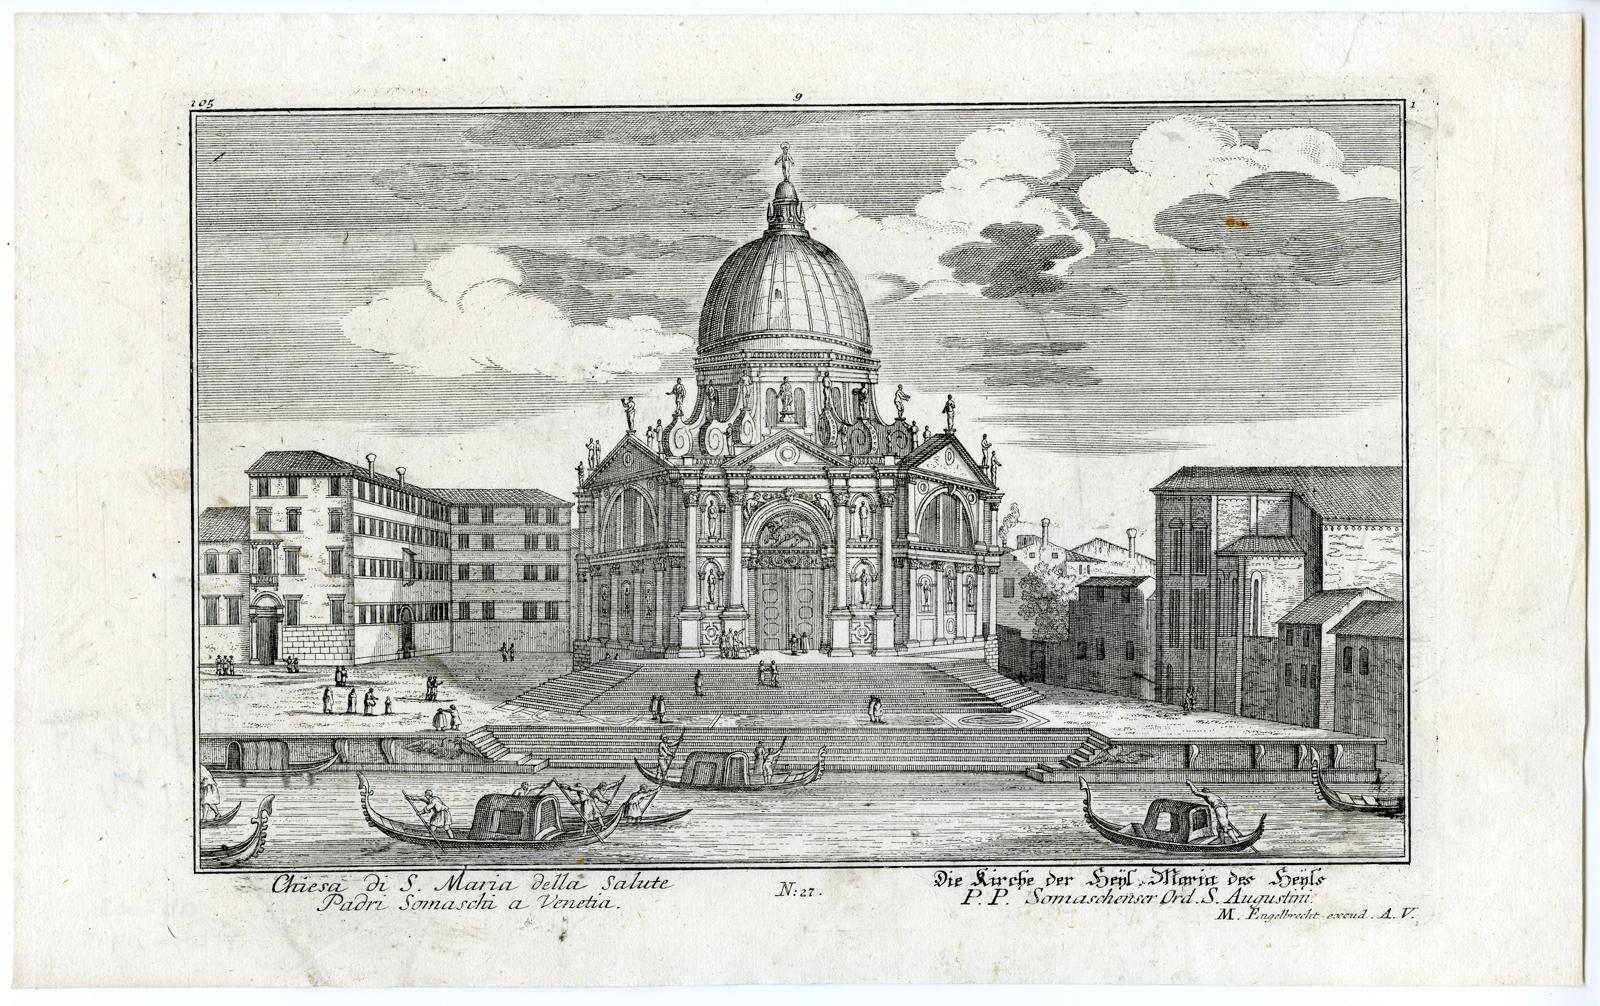 Subject: Antique print, titled: 'Chiesa di S. Maria della Salute Padri Somaschi a Venetia. Die Kirche der heyl. Maria (…).' - This very rare original antique print depicts a view of Santa Maria della Salute from the other side of the Grand Canal in